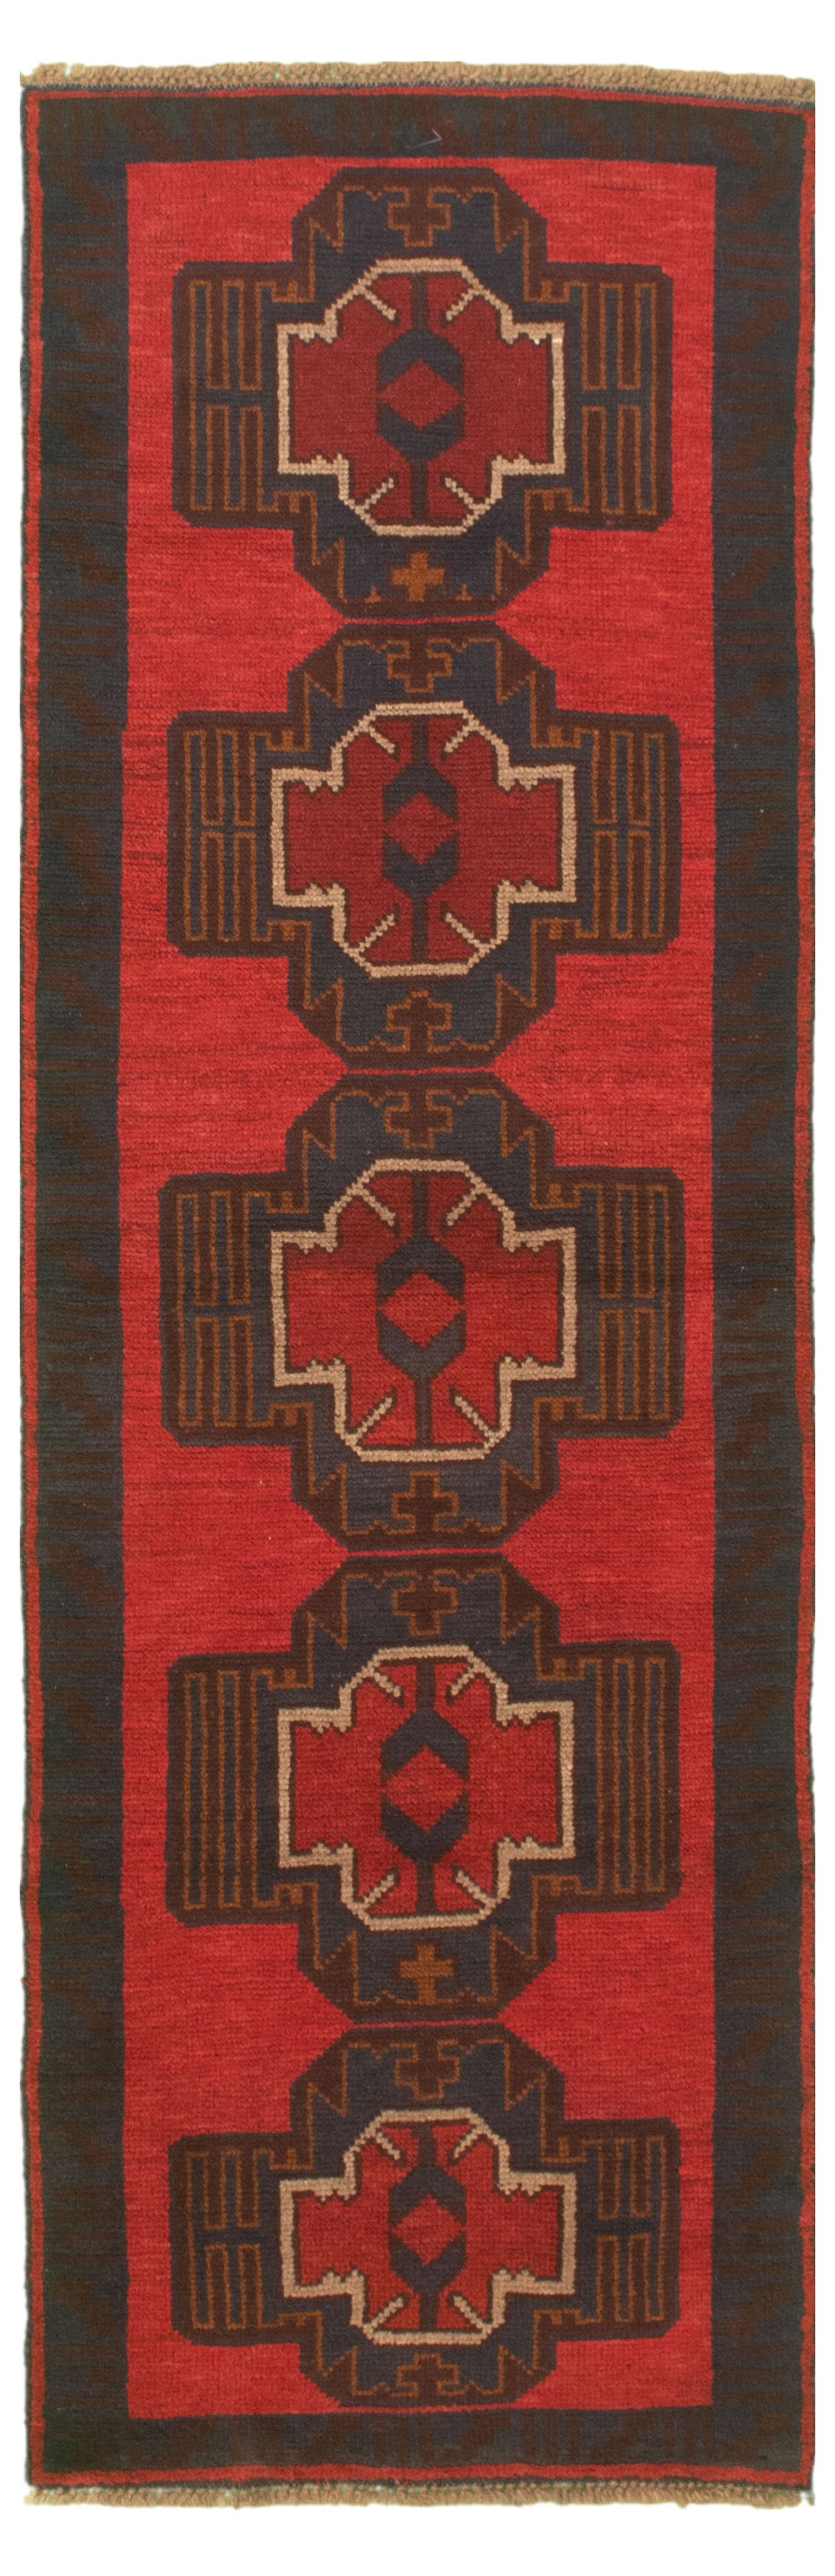 Hand-knotted Baluch Red Wool Rug 2'5" x 7'10" Size: 2'5" x 7'10"  